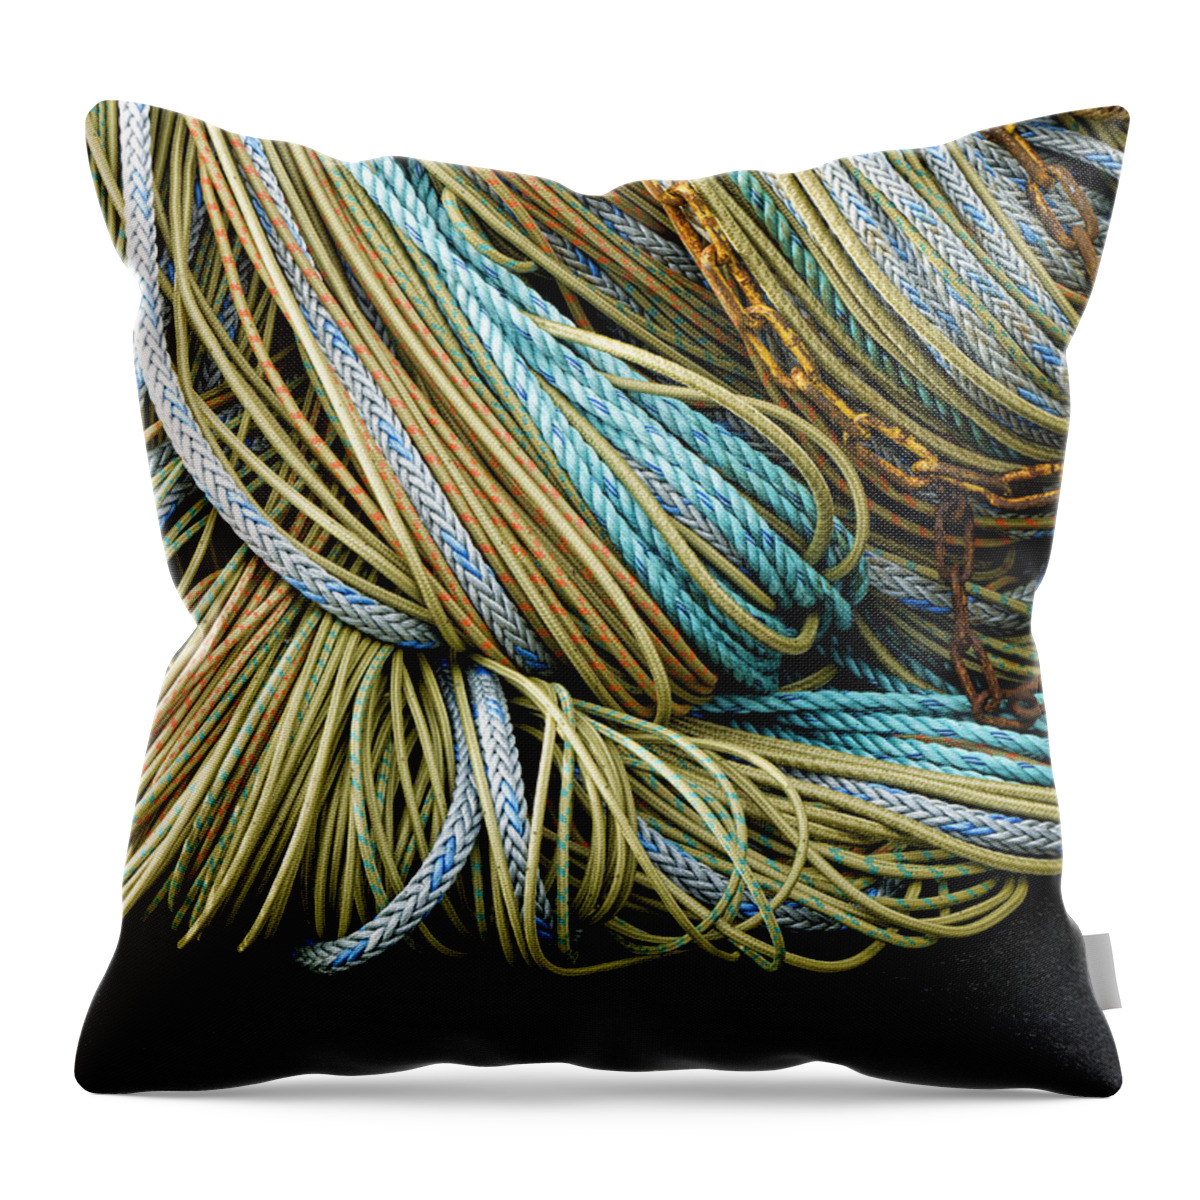 Fishing Throw Pillow featuring the photograph Colorful Pile of Fishing Nets and Ropes by Carol Leigh